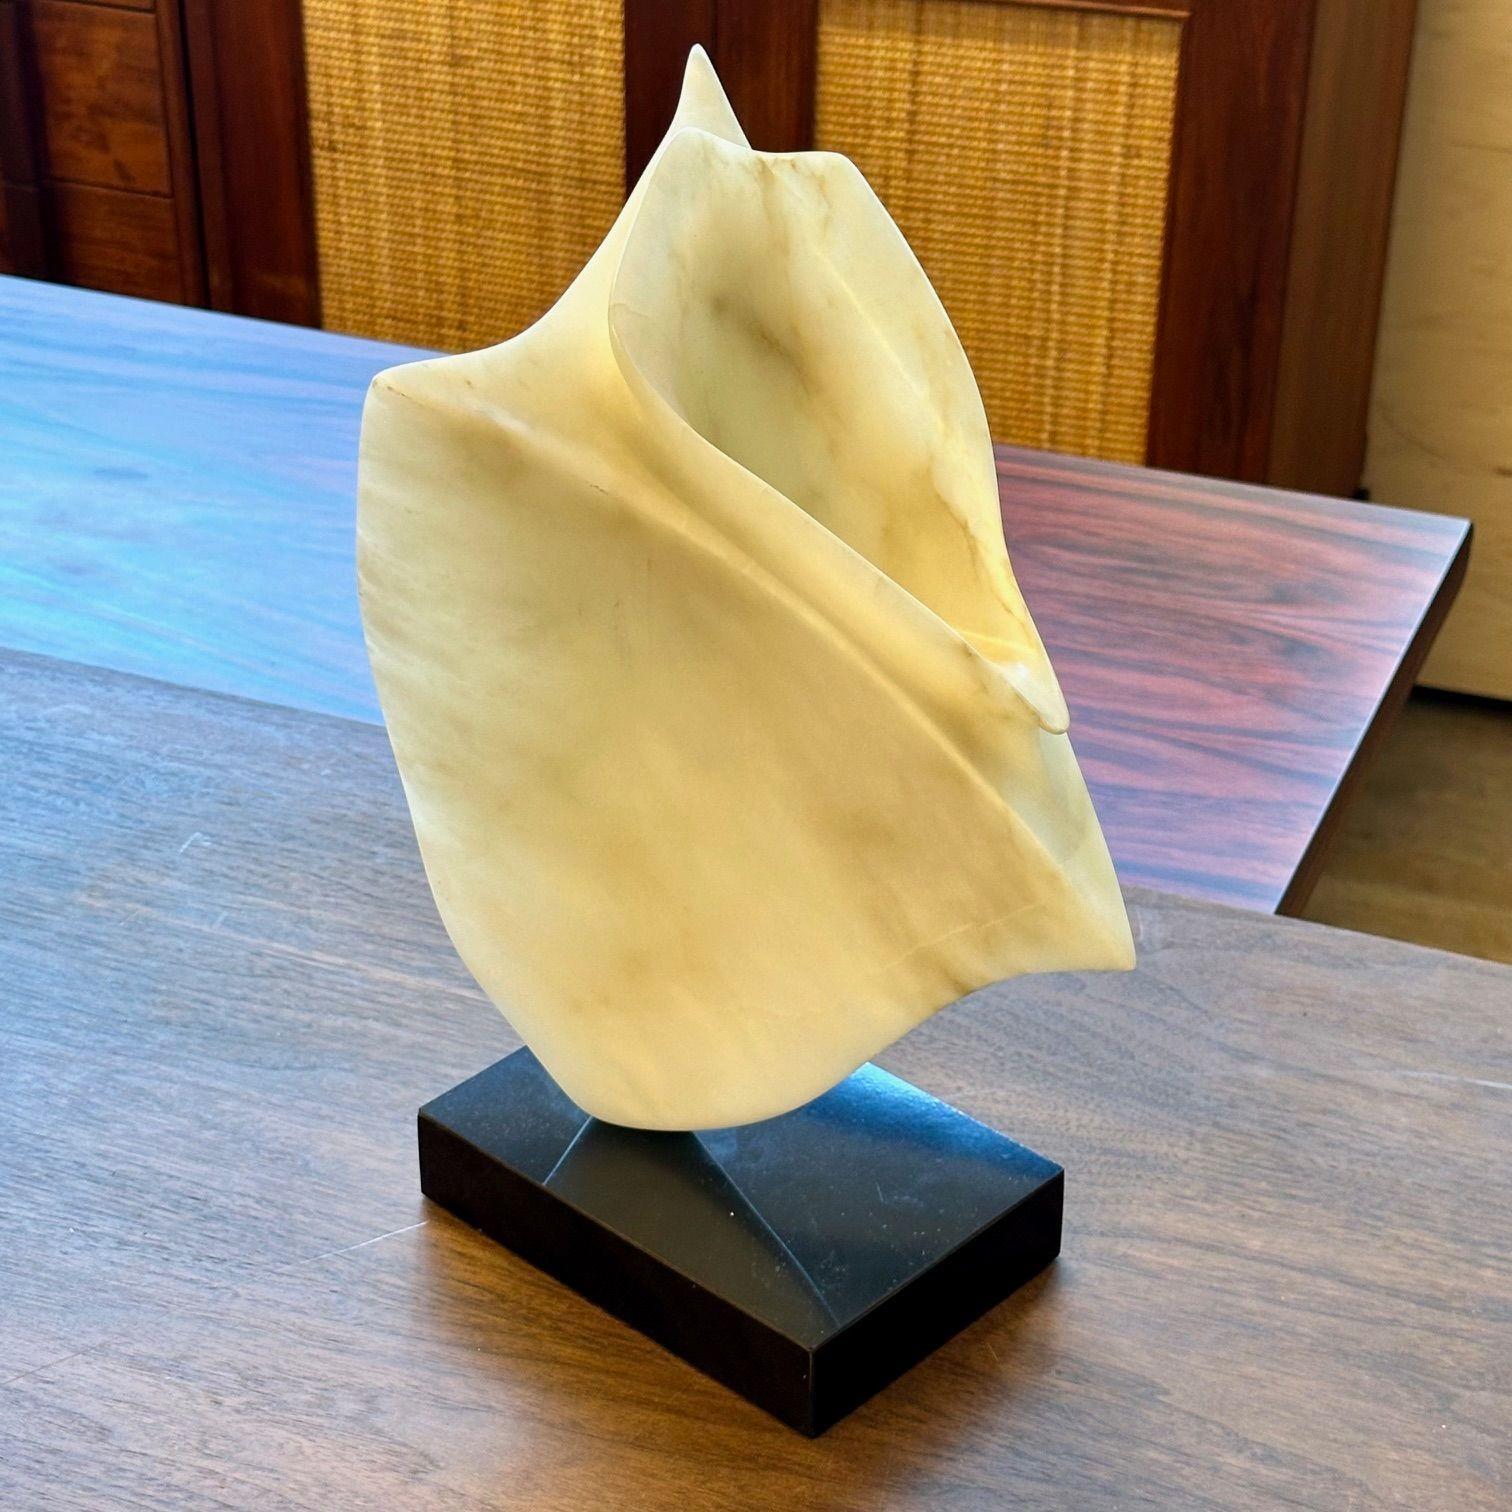 Contemporary Abstract Stone / Marble Sculpture on Base, Organic Form, 1990er Jahre im Zustand „Gut“ im Angebot in Stamford, CT